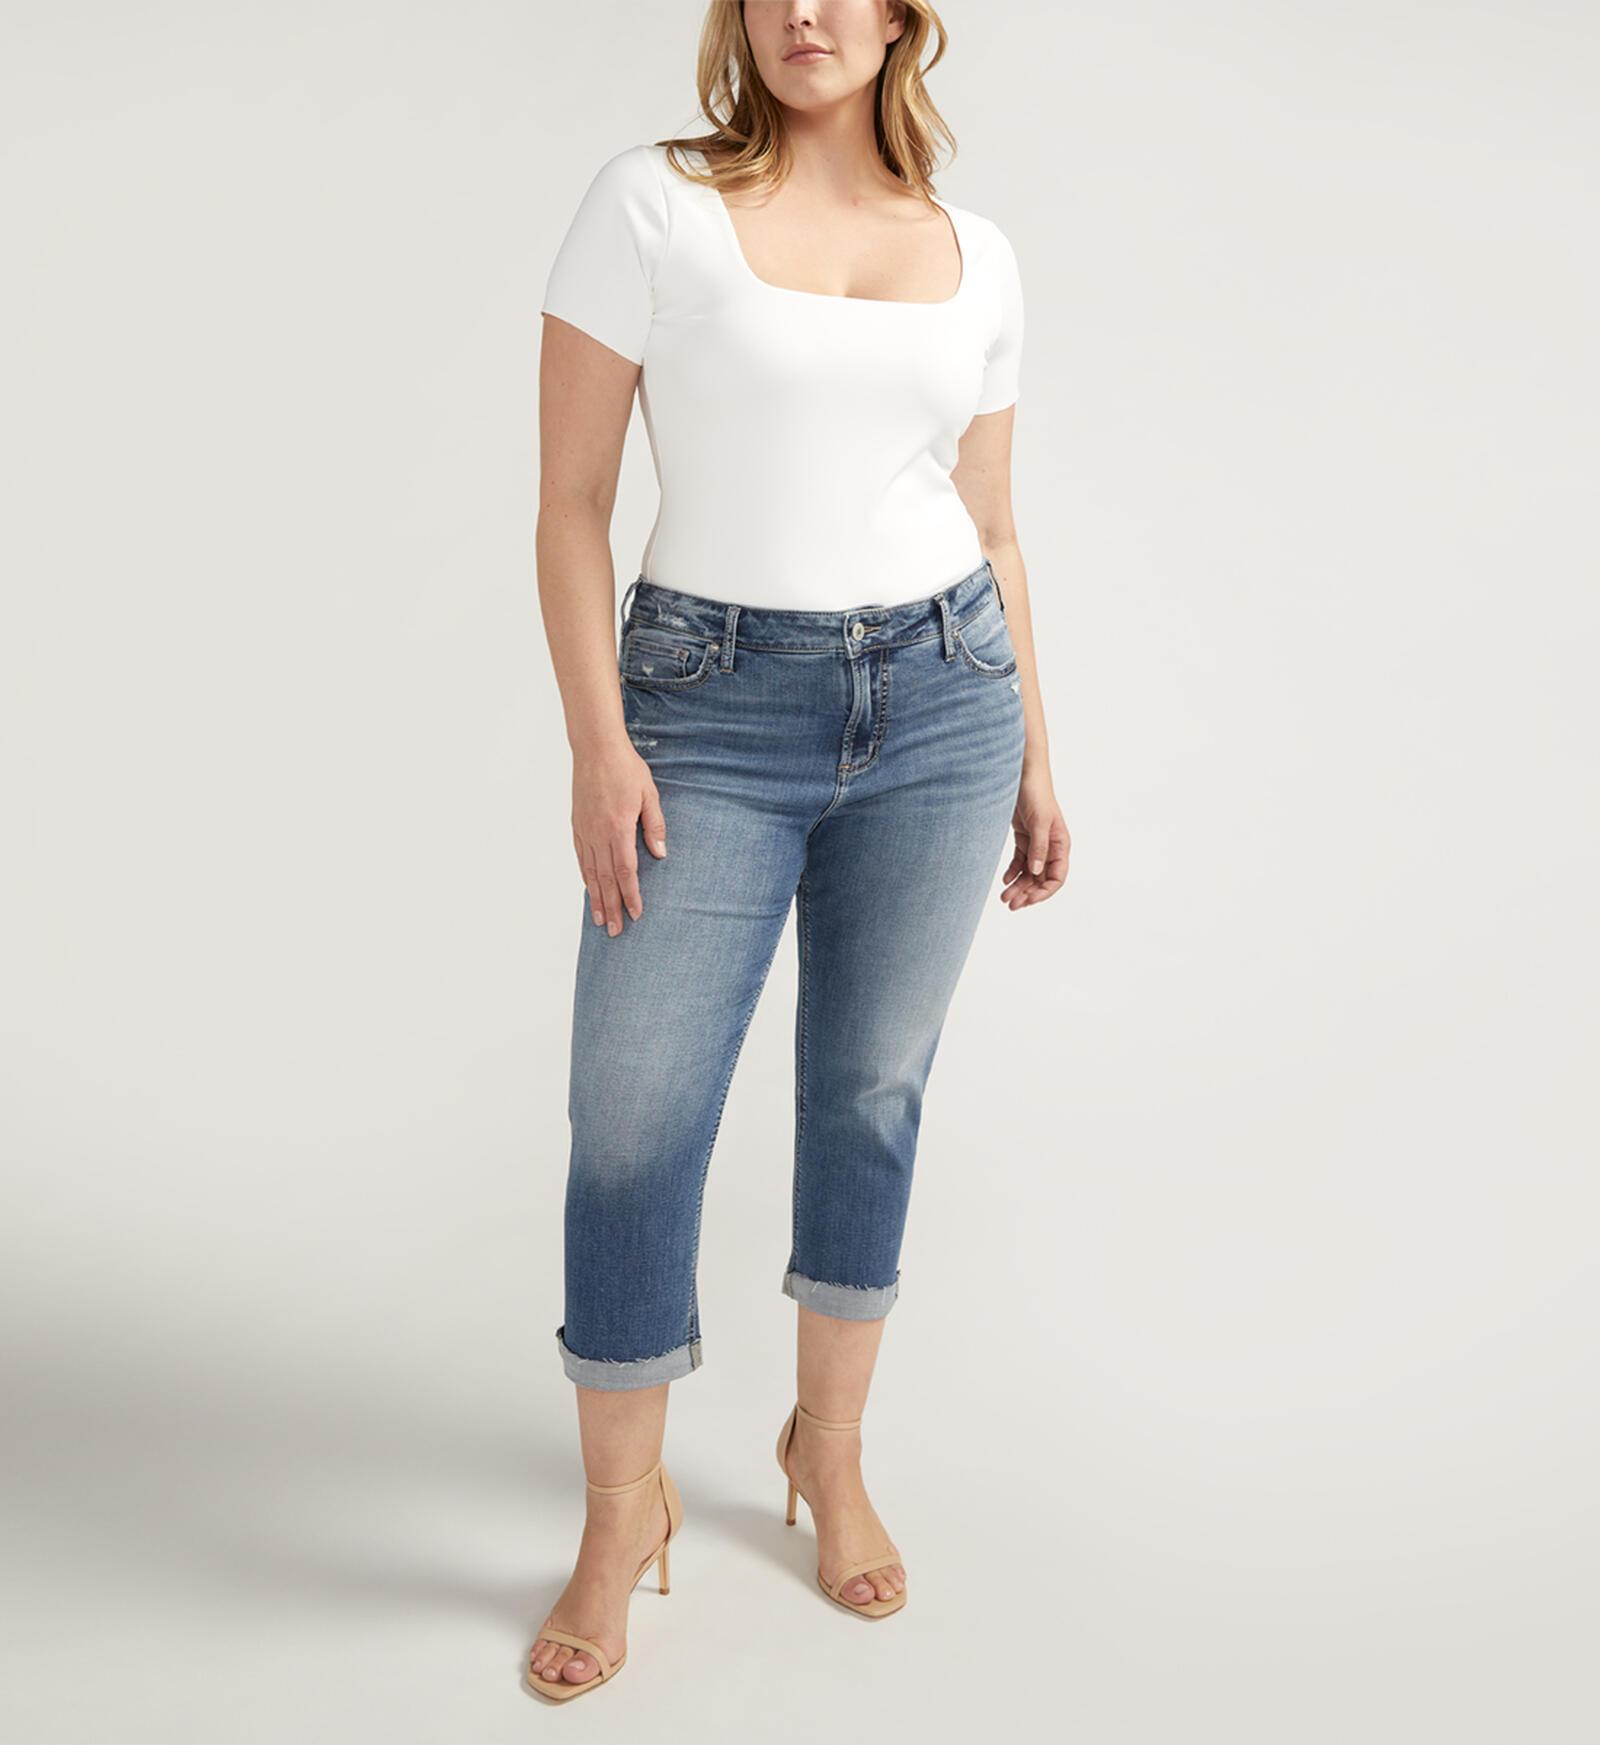 Buy Elyse Mid Rise Luxe Stretch Capri Plus Size for USD 74.00